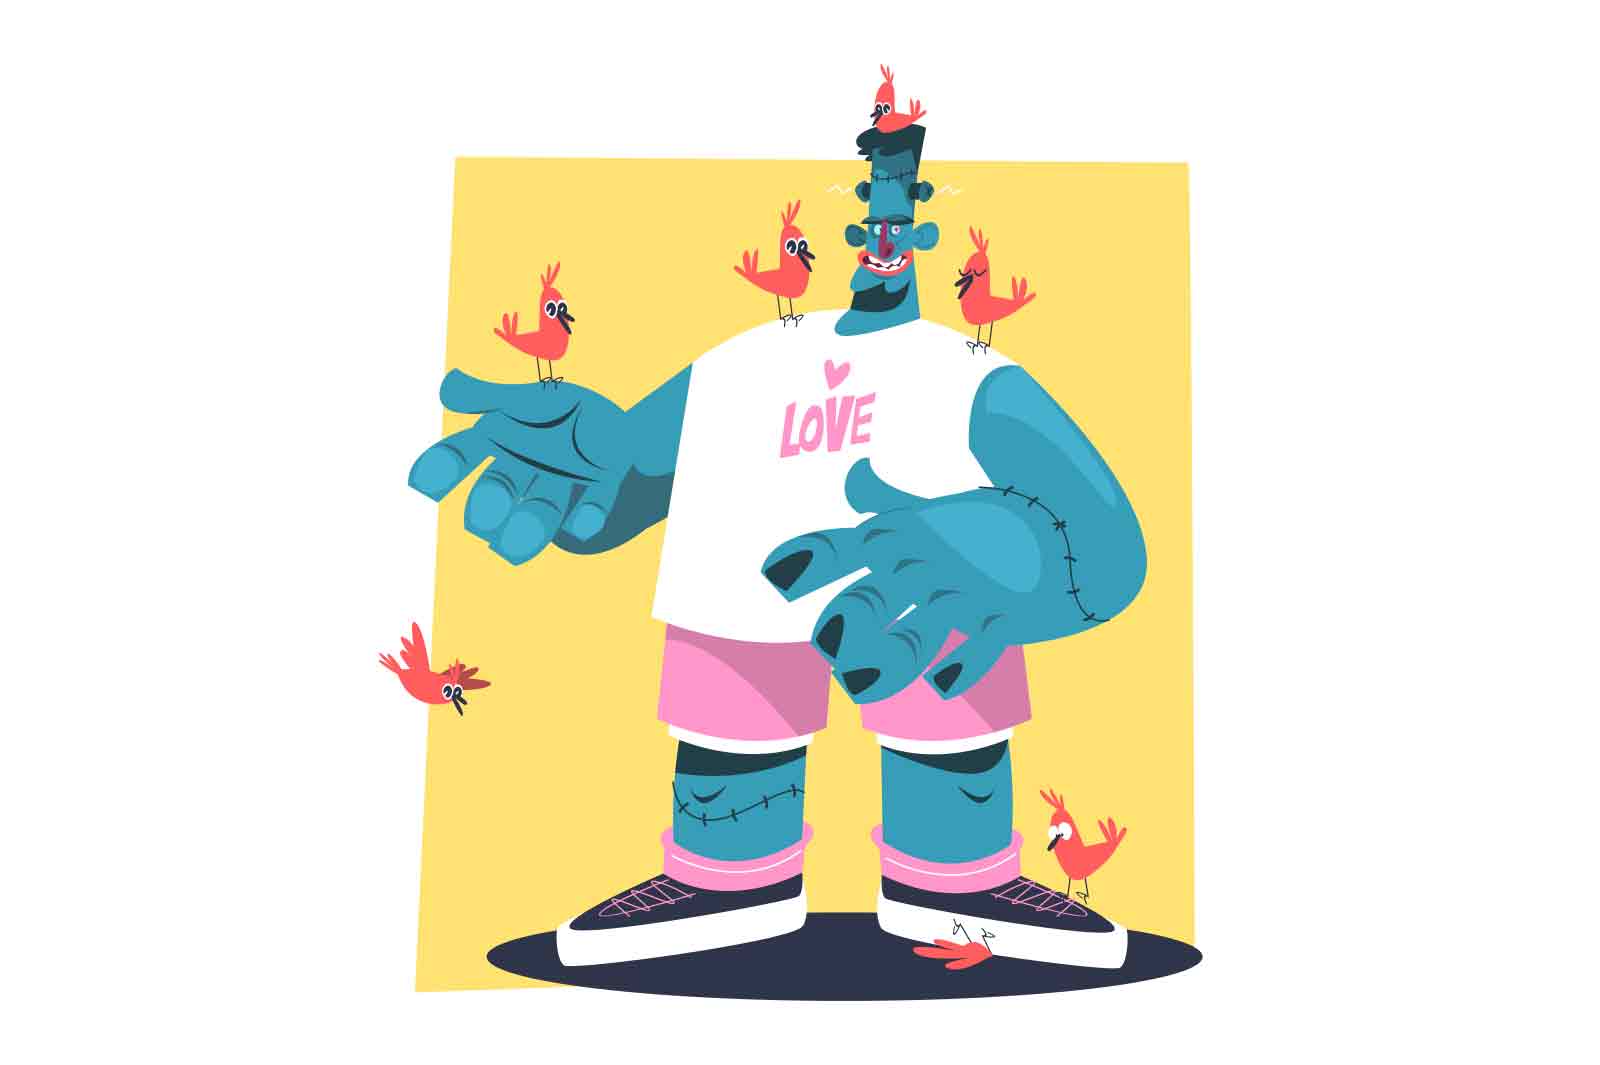 Friendly Monster with Love Birds, vector illustration. Cute and cheerful monster with blue skin and pink heart on his shirt is surrounded by colorful birds on his head and hands.